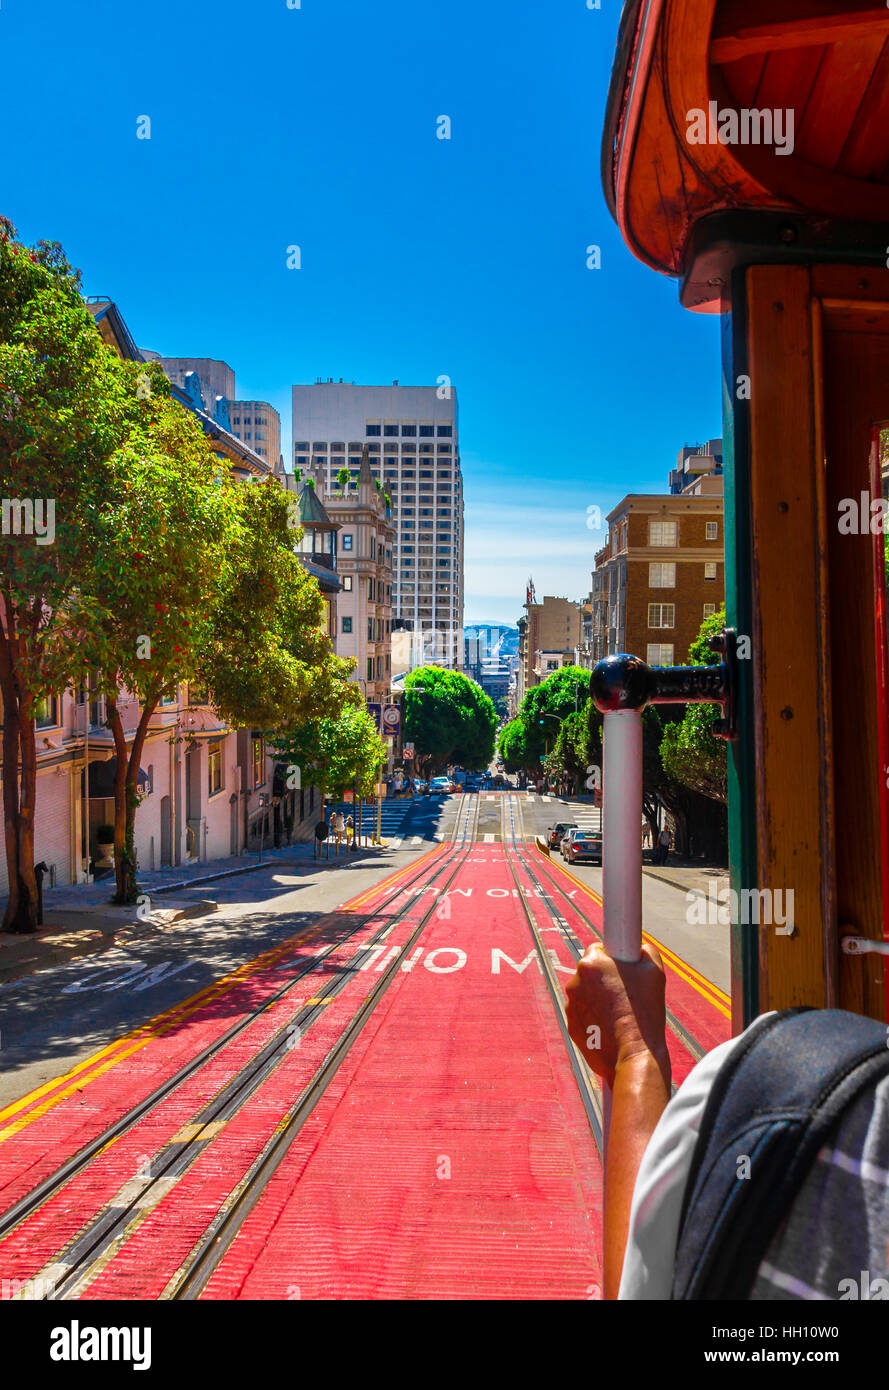 Ride with the cable car in San Francisco. The picture shows a person riding on the famous MUNI train on Powell-Mason line down the hill of Powell Stre Stock Photo